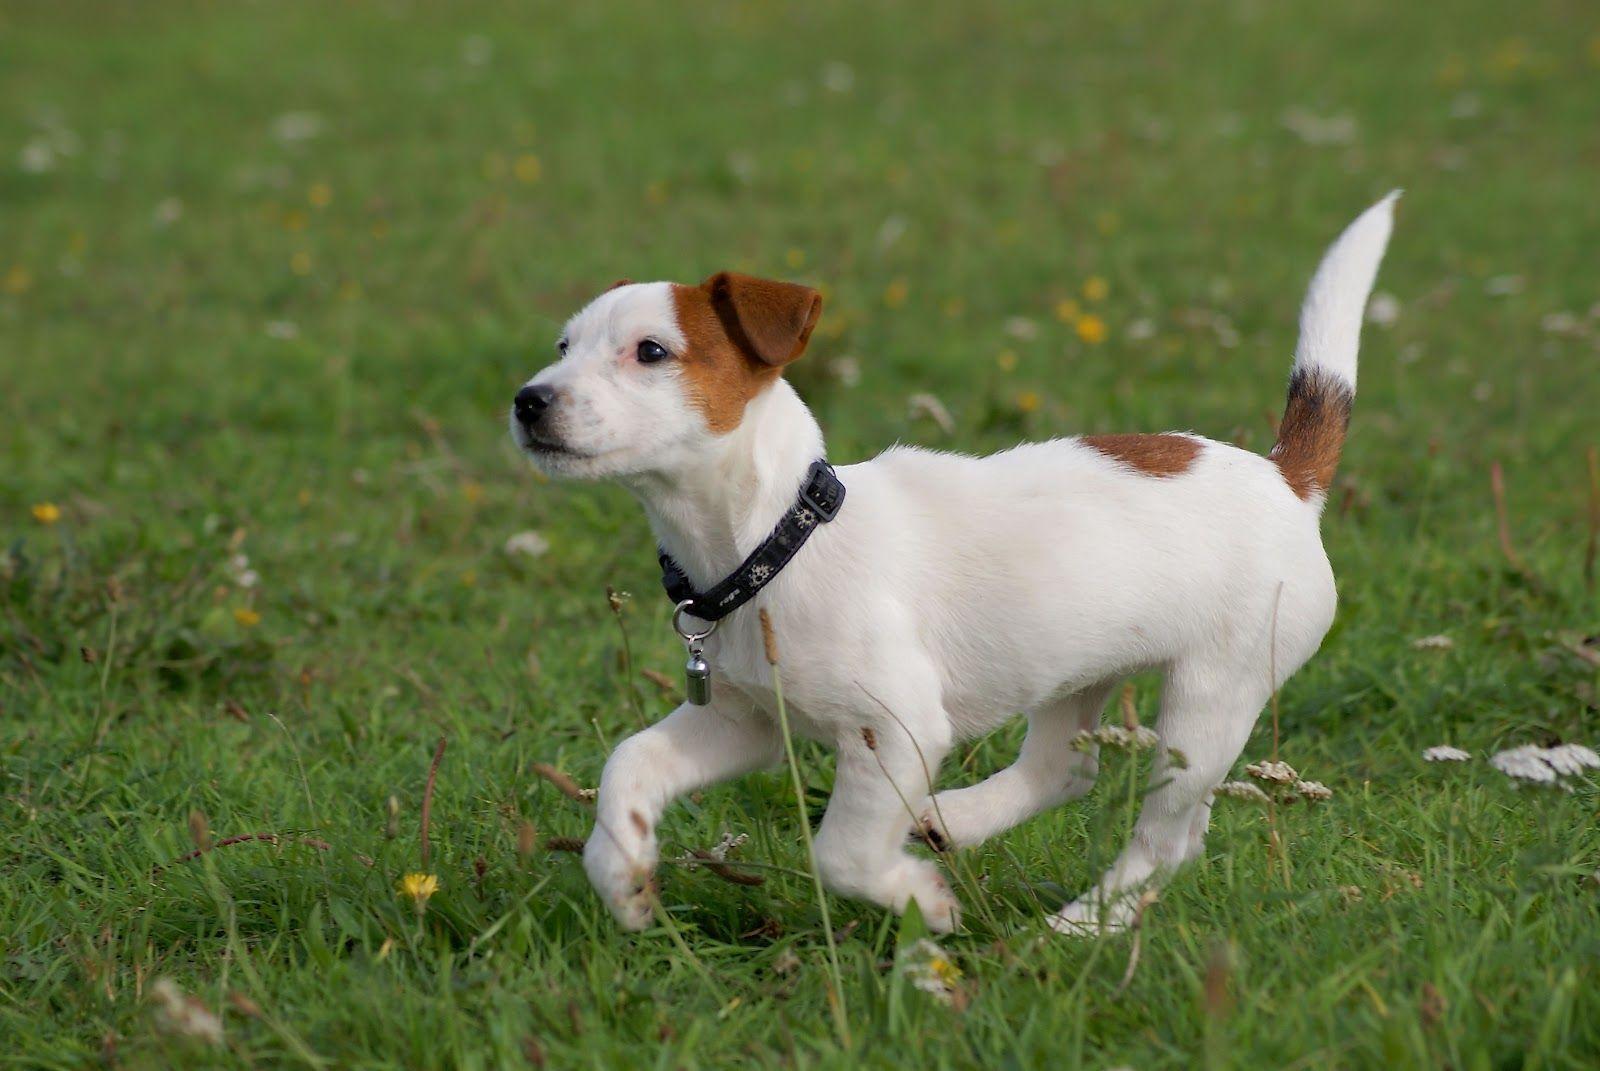 Running Jack Russell Terrier photo and wallpaper. Beautiful